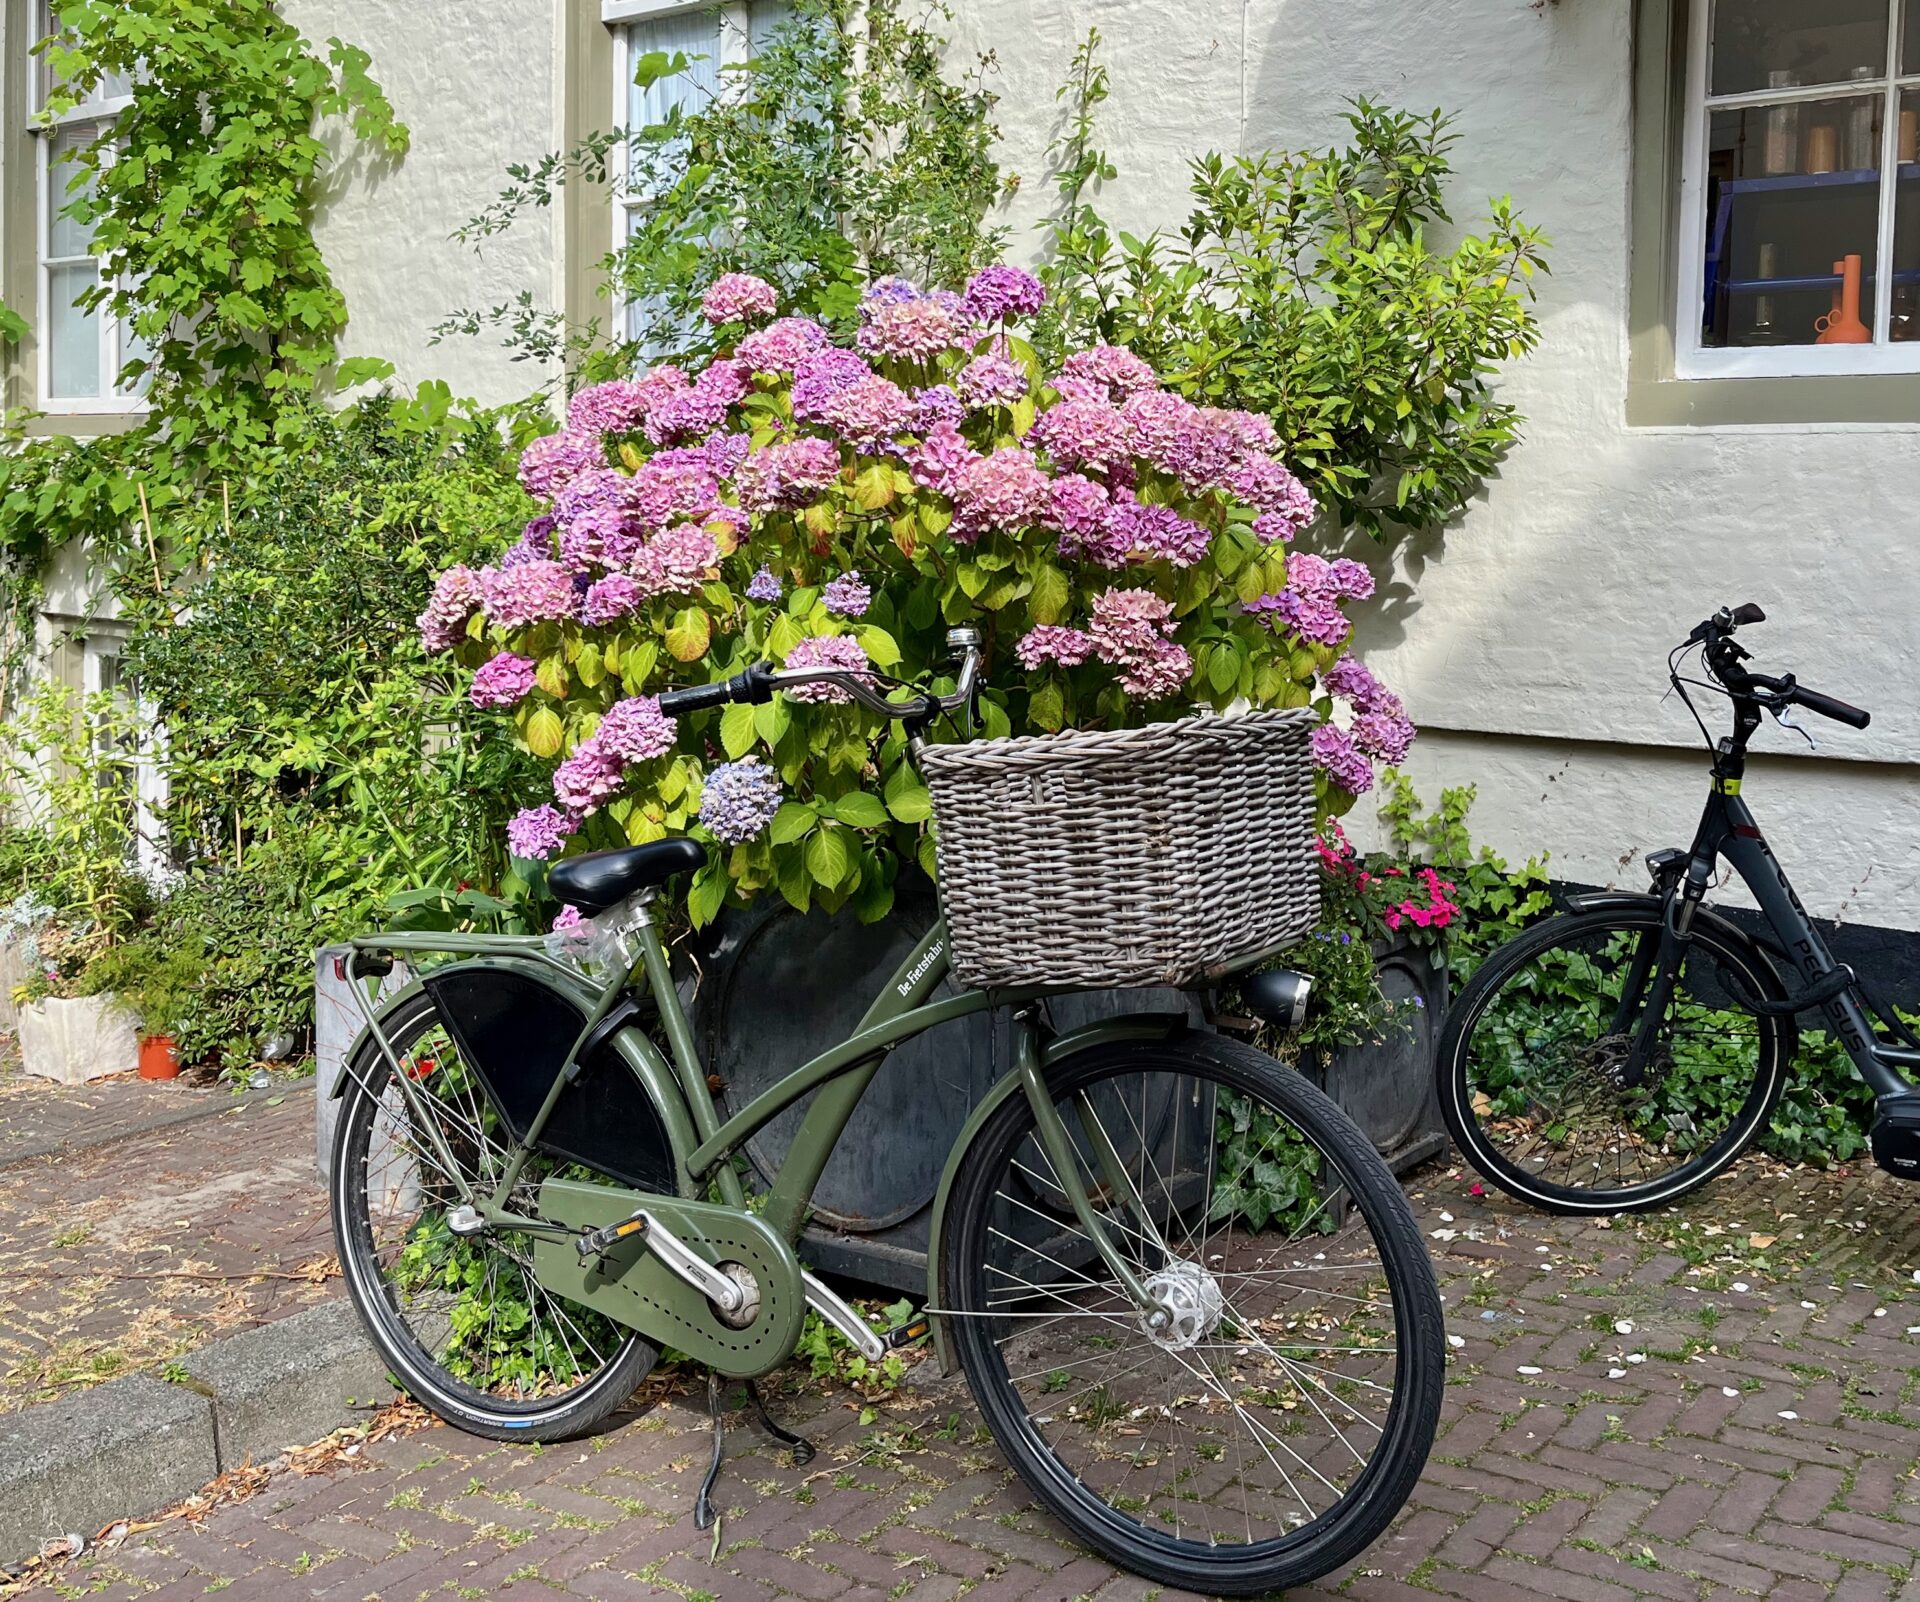 Bicycle with wicker basket for holding Dutch books with pink flowers behind in the Netherlands